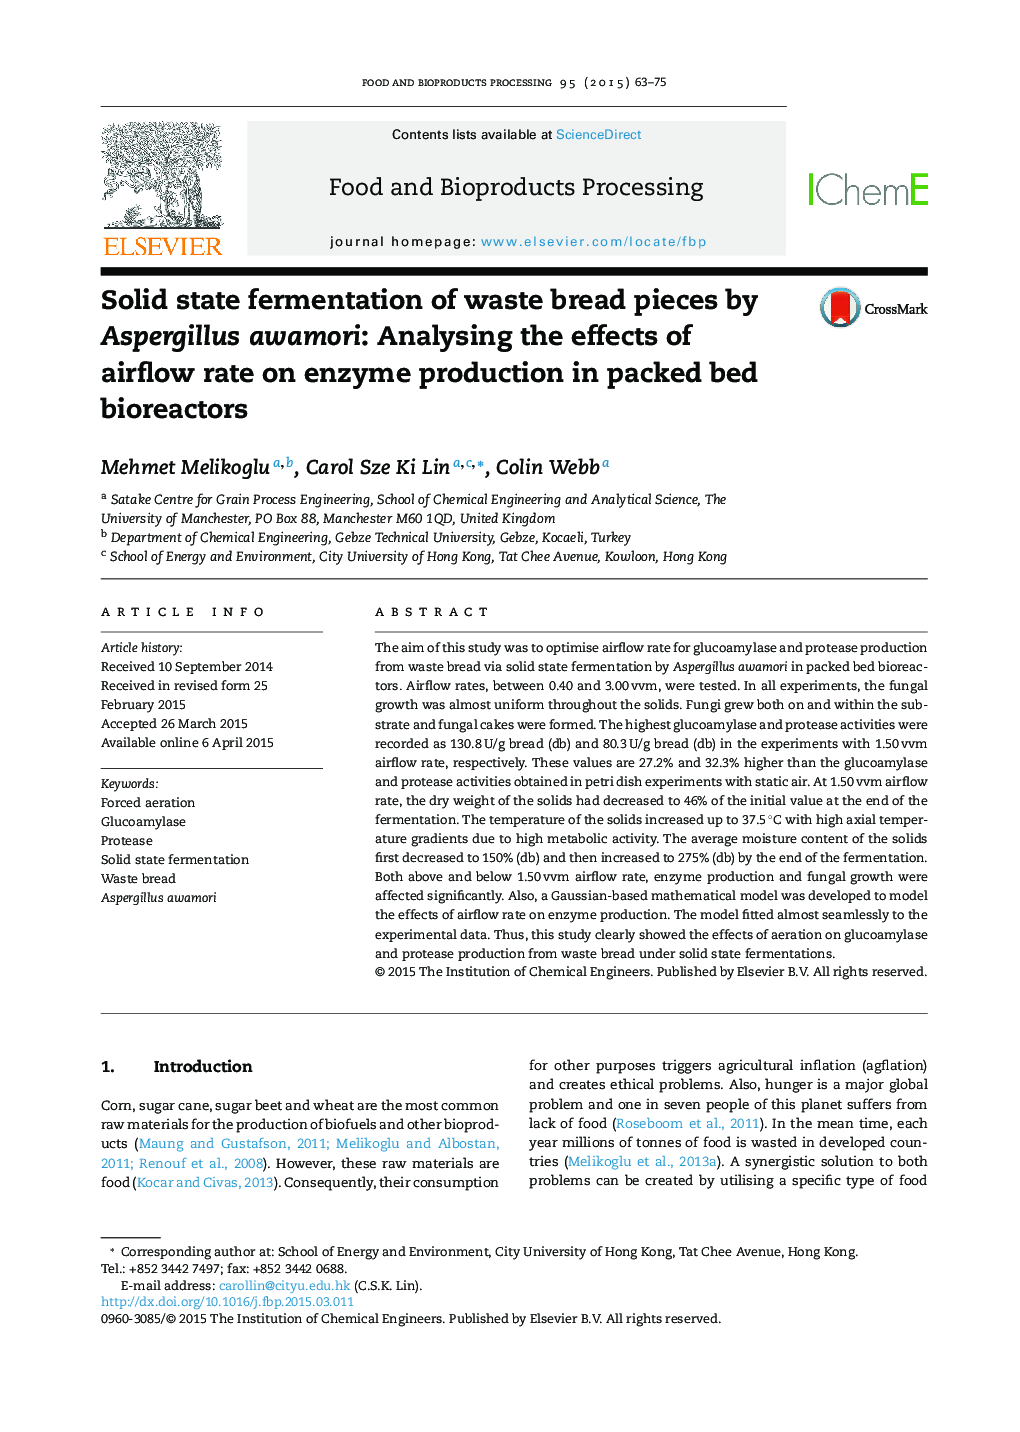 Solid state fermentation of waste bread pieces by Aspergillus awamori: Analysing the effects of airflow rate on enzyme production in packed bed bioreactors